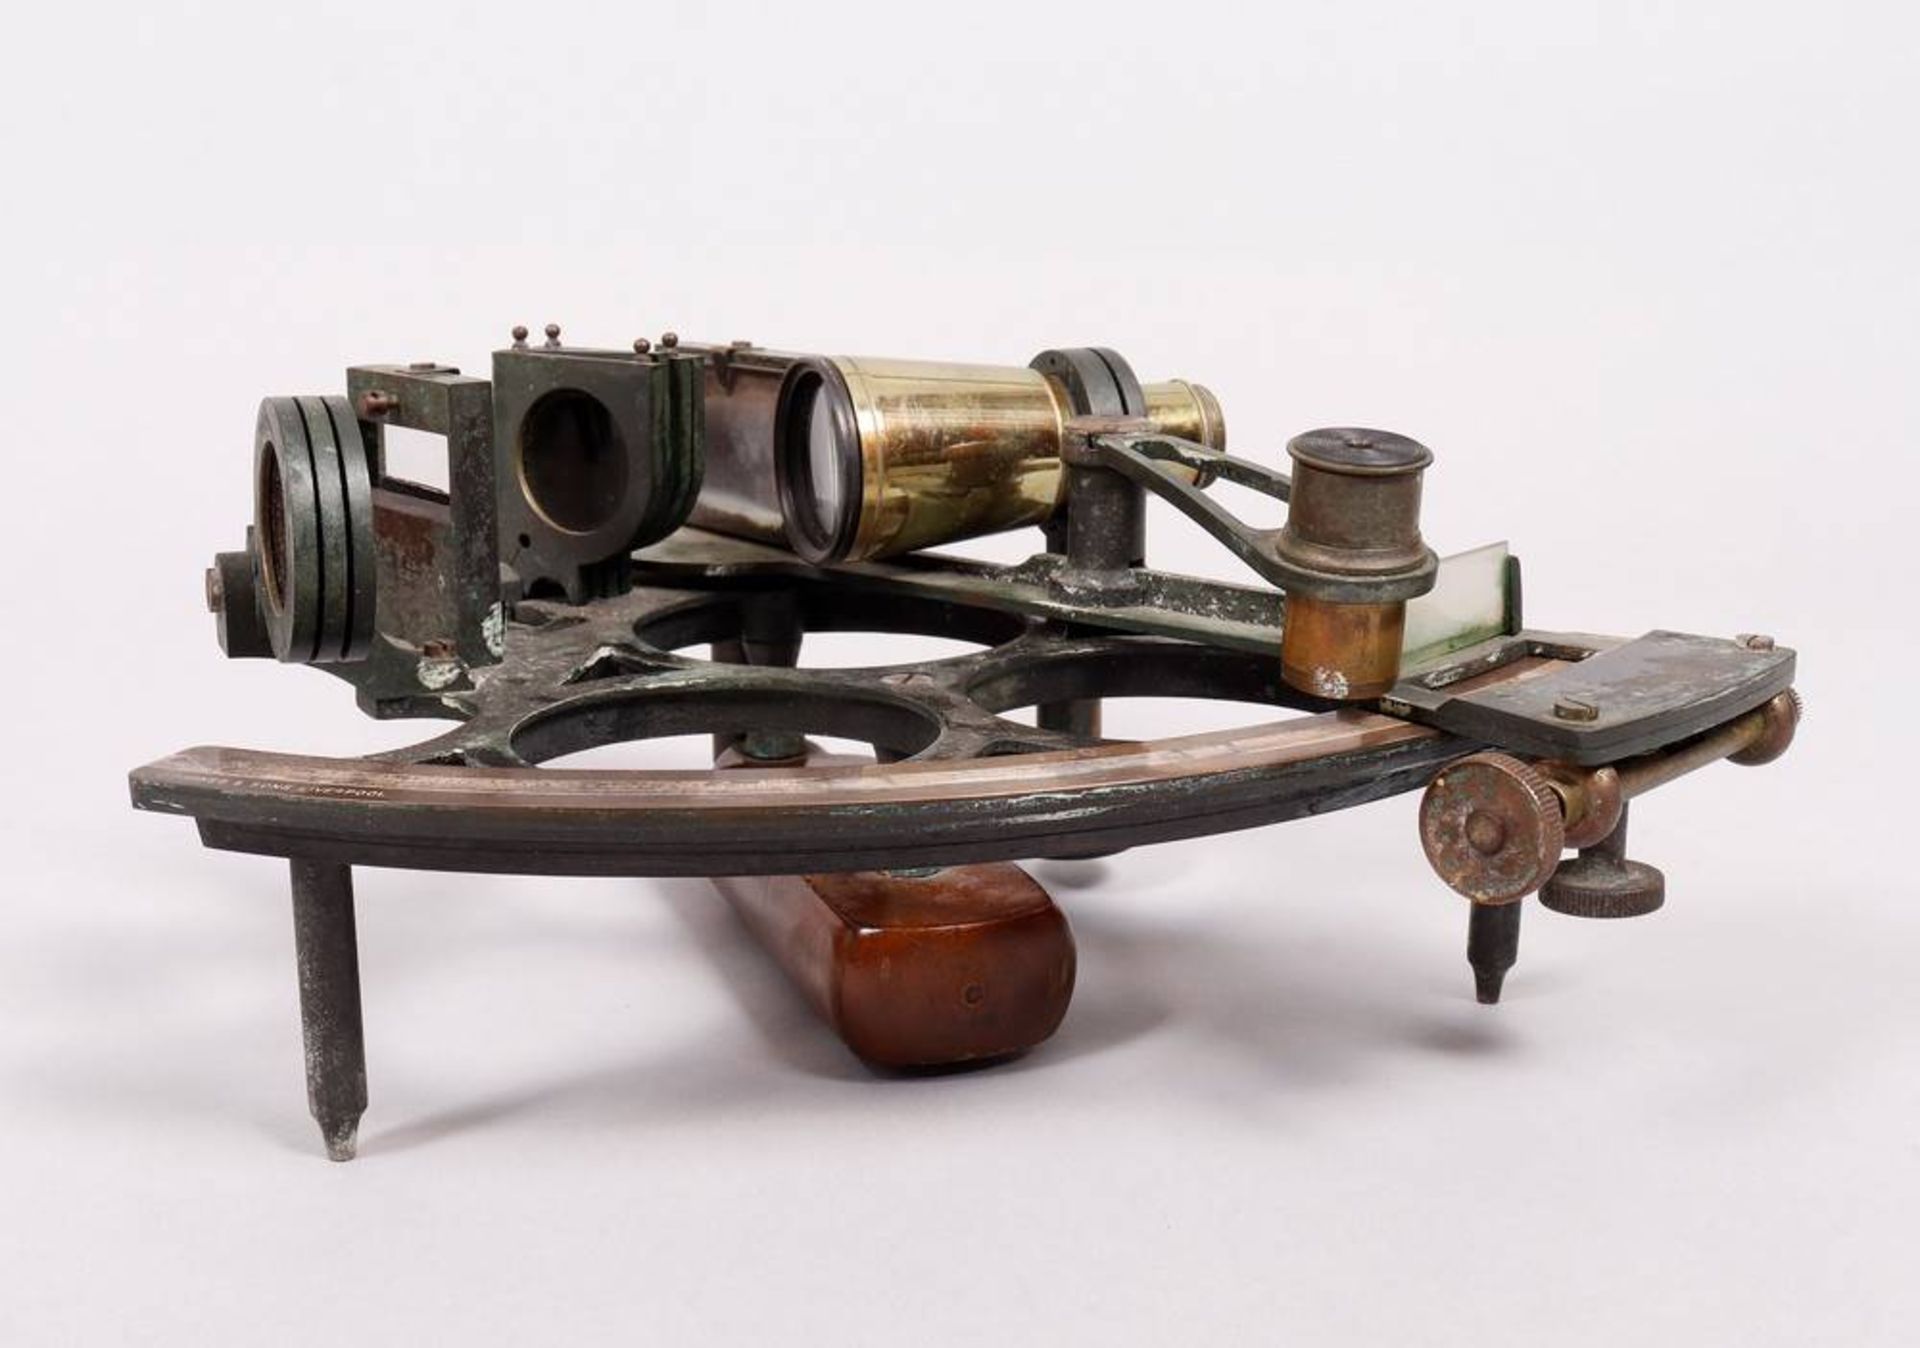 Sextant in transport box, J. Parkes & Sons, Liverpool, c. 1900